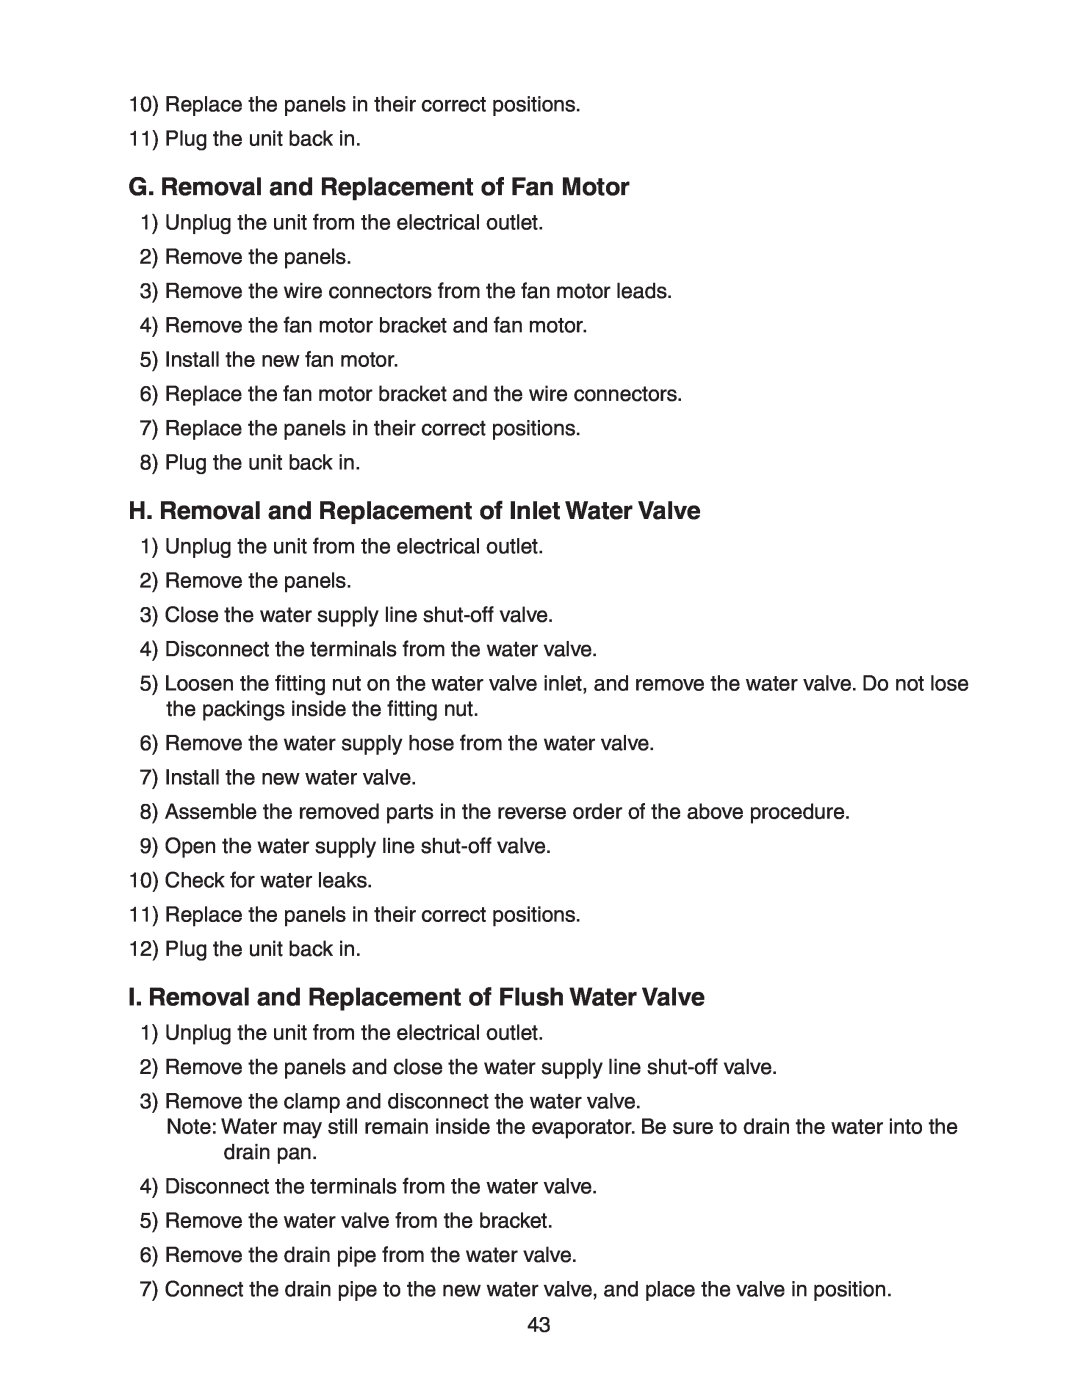 Hoshizaki F-300BAF service manual G. Removal and Replacement of Fan Motor, H. Removal and Replacement of Inlet Water Valve 